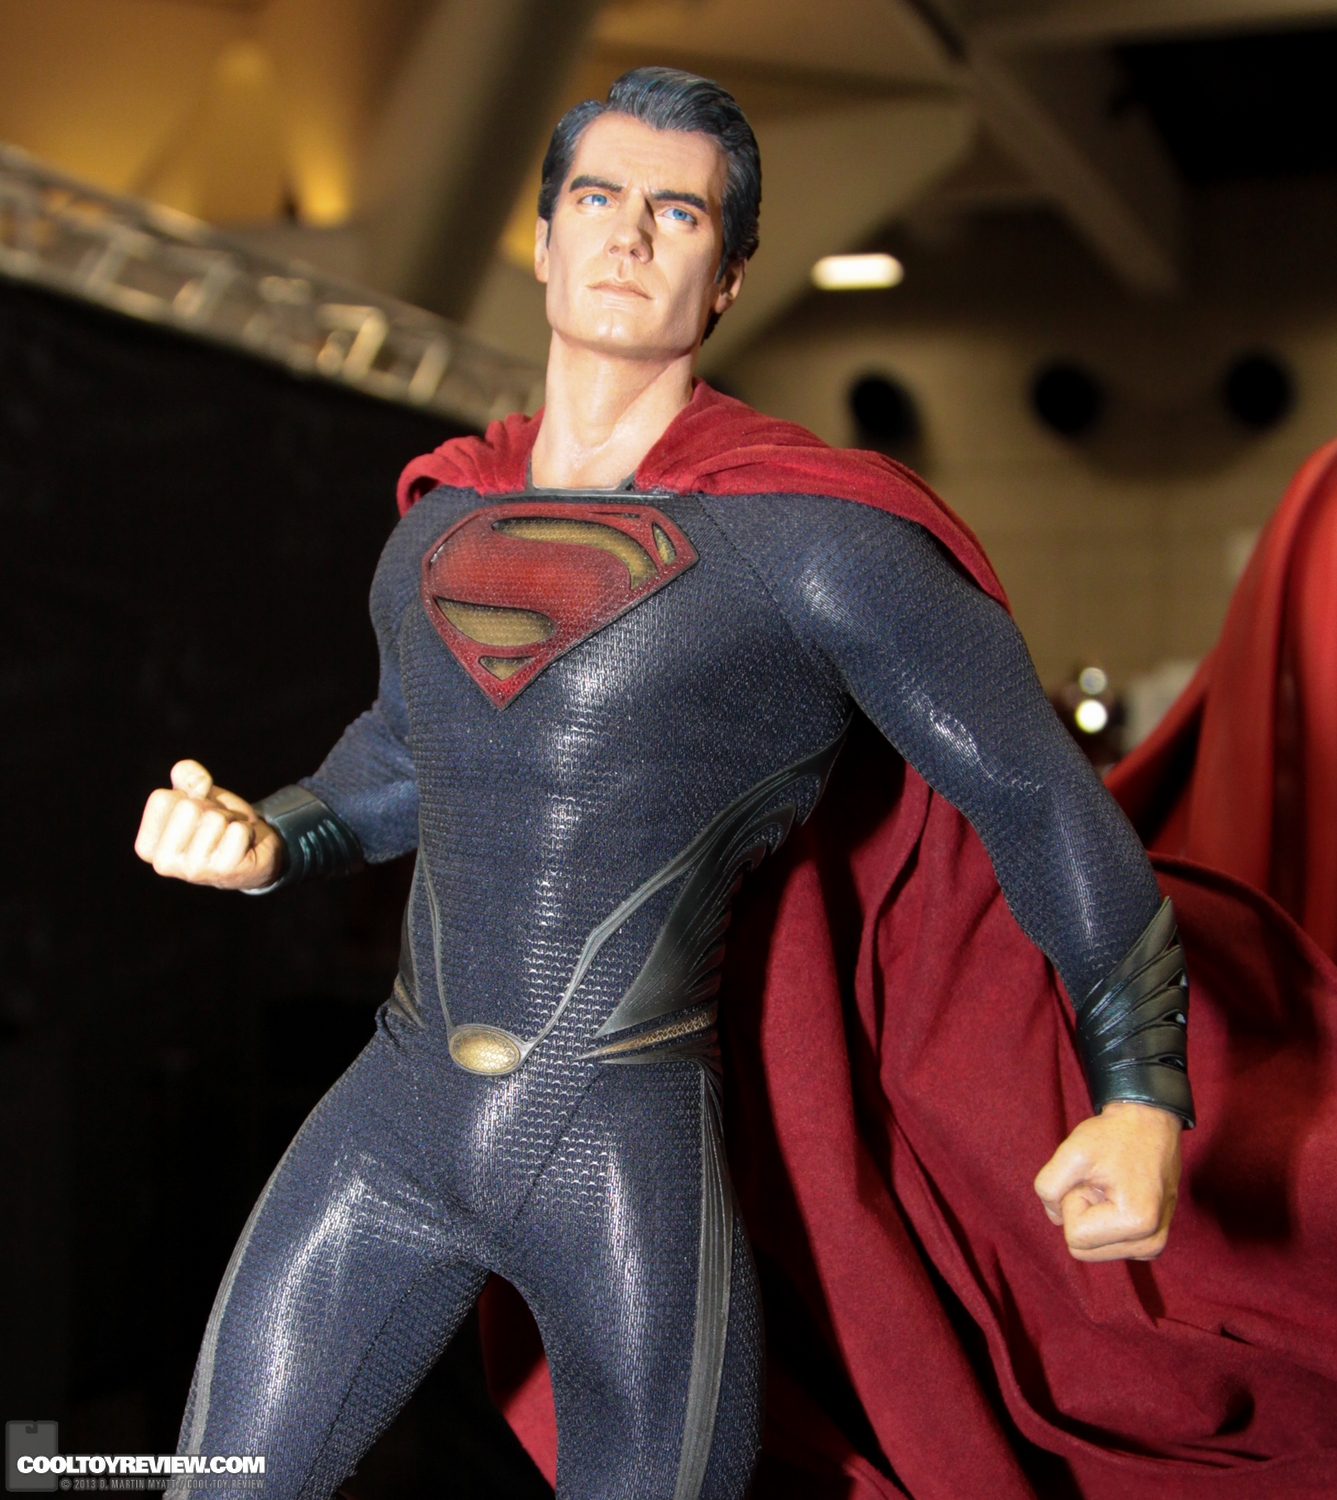 SDCC_2013_Sideshow_Collectibles_Thursday-069.jpg